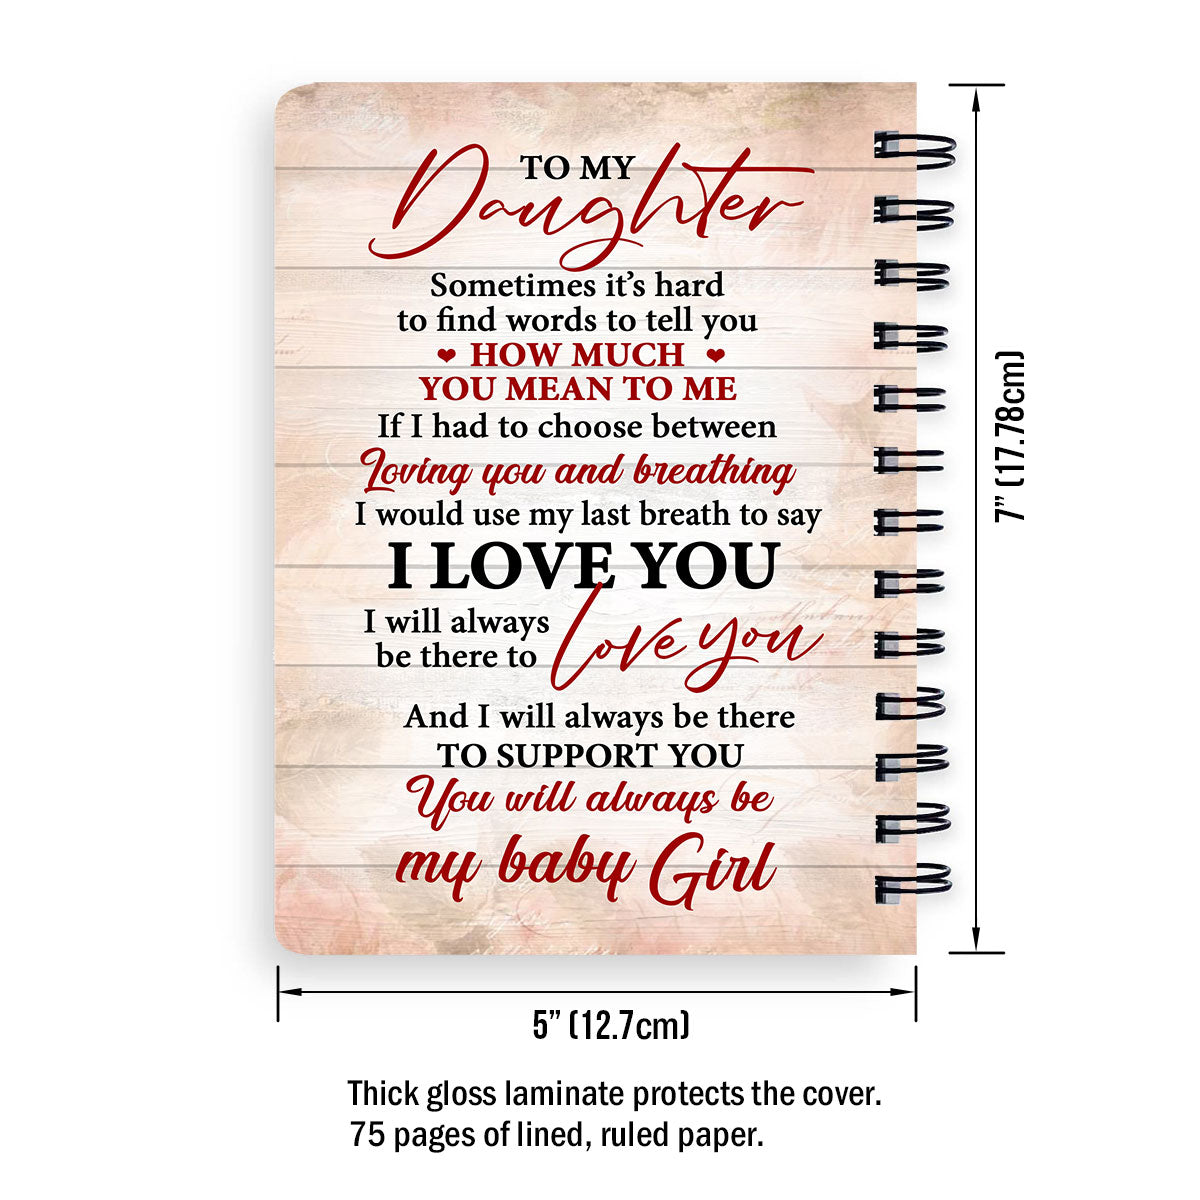 You Will Always Be My Baby Girl Beautiful Personalized Spiral Journal For Daughter, Christian Art Gifts Journal